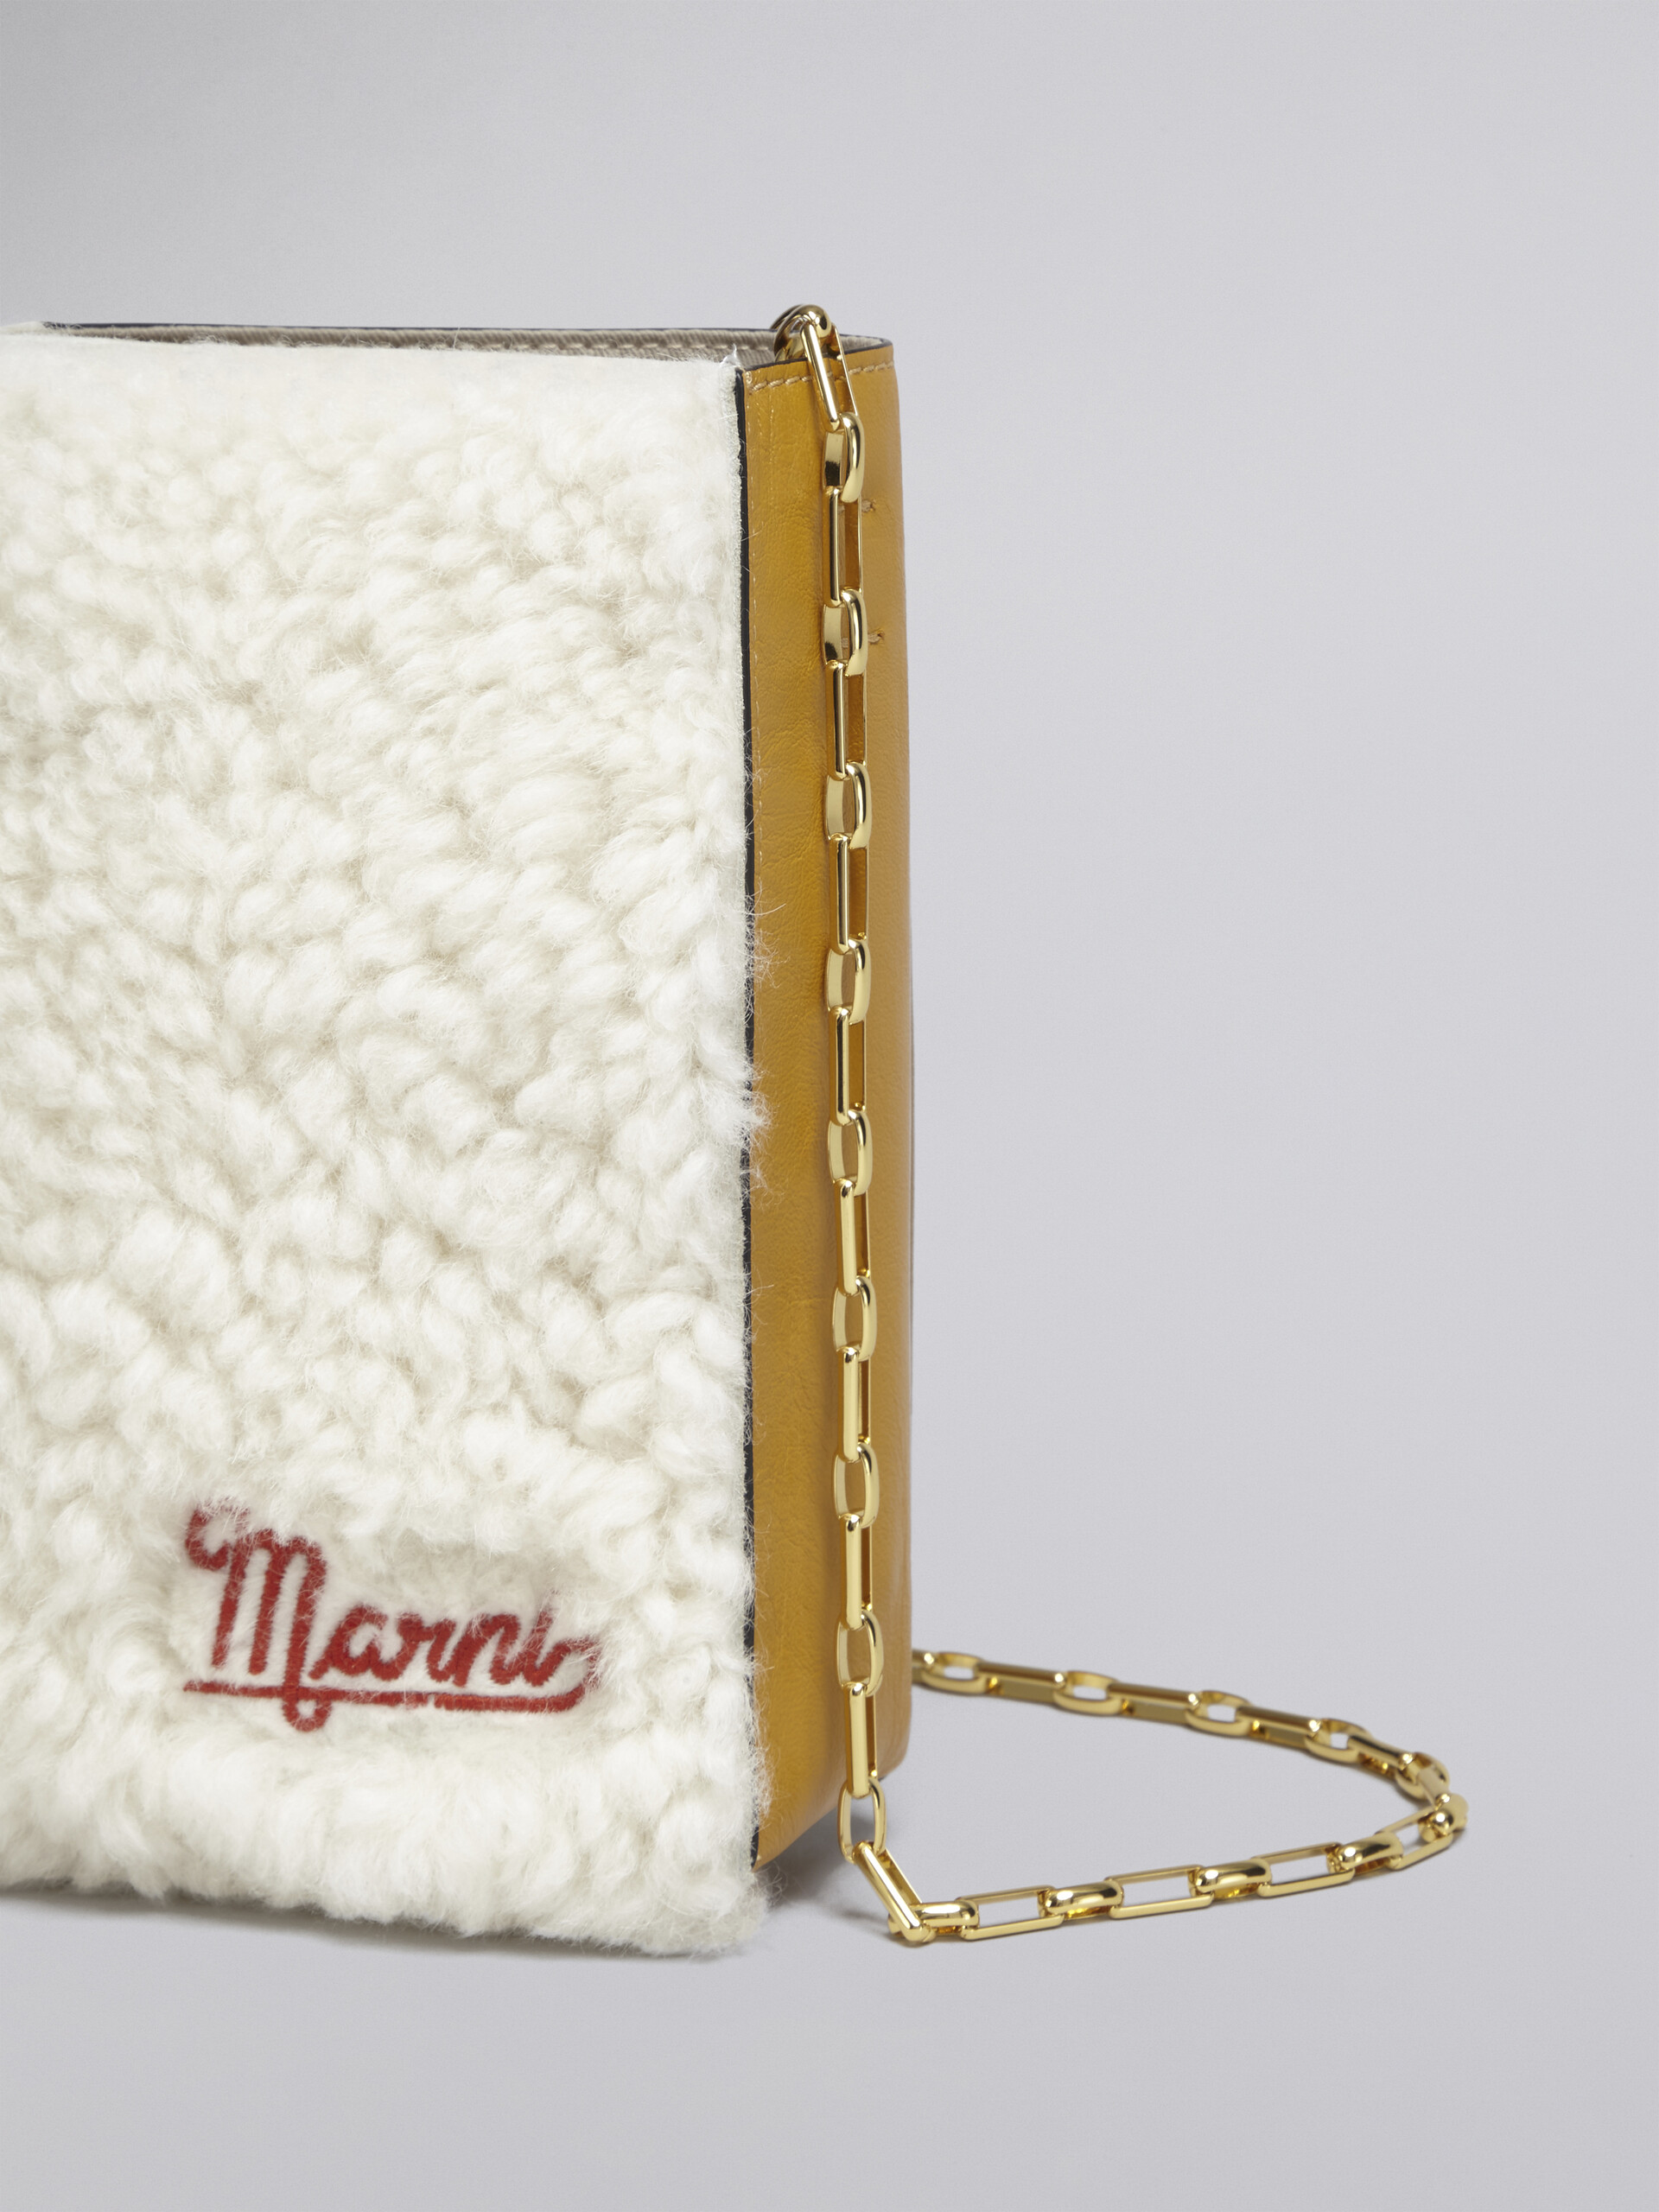 MUSEO SOFT bag in yellow and green shearling and calf leather - Shoulder Bags - Image 3